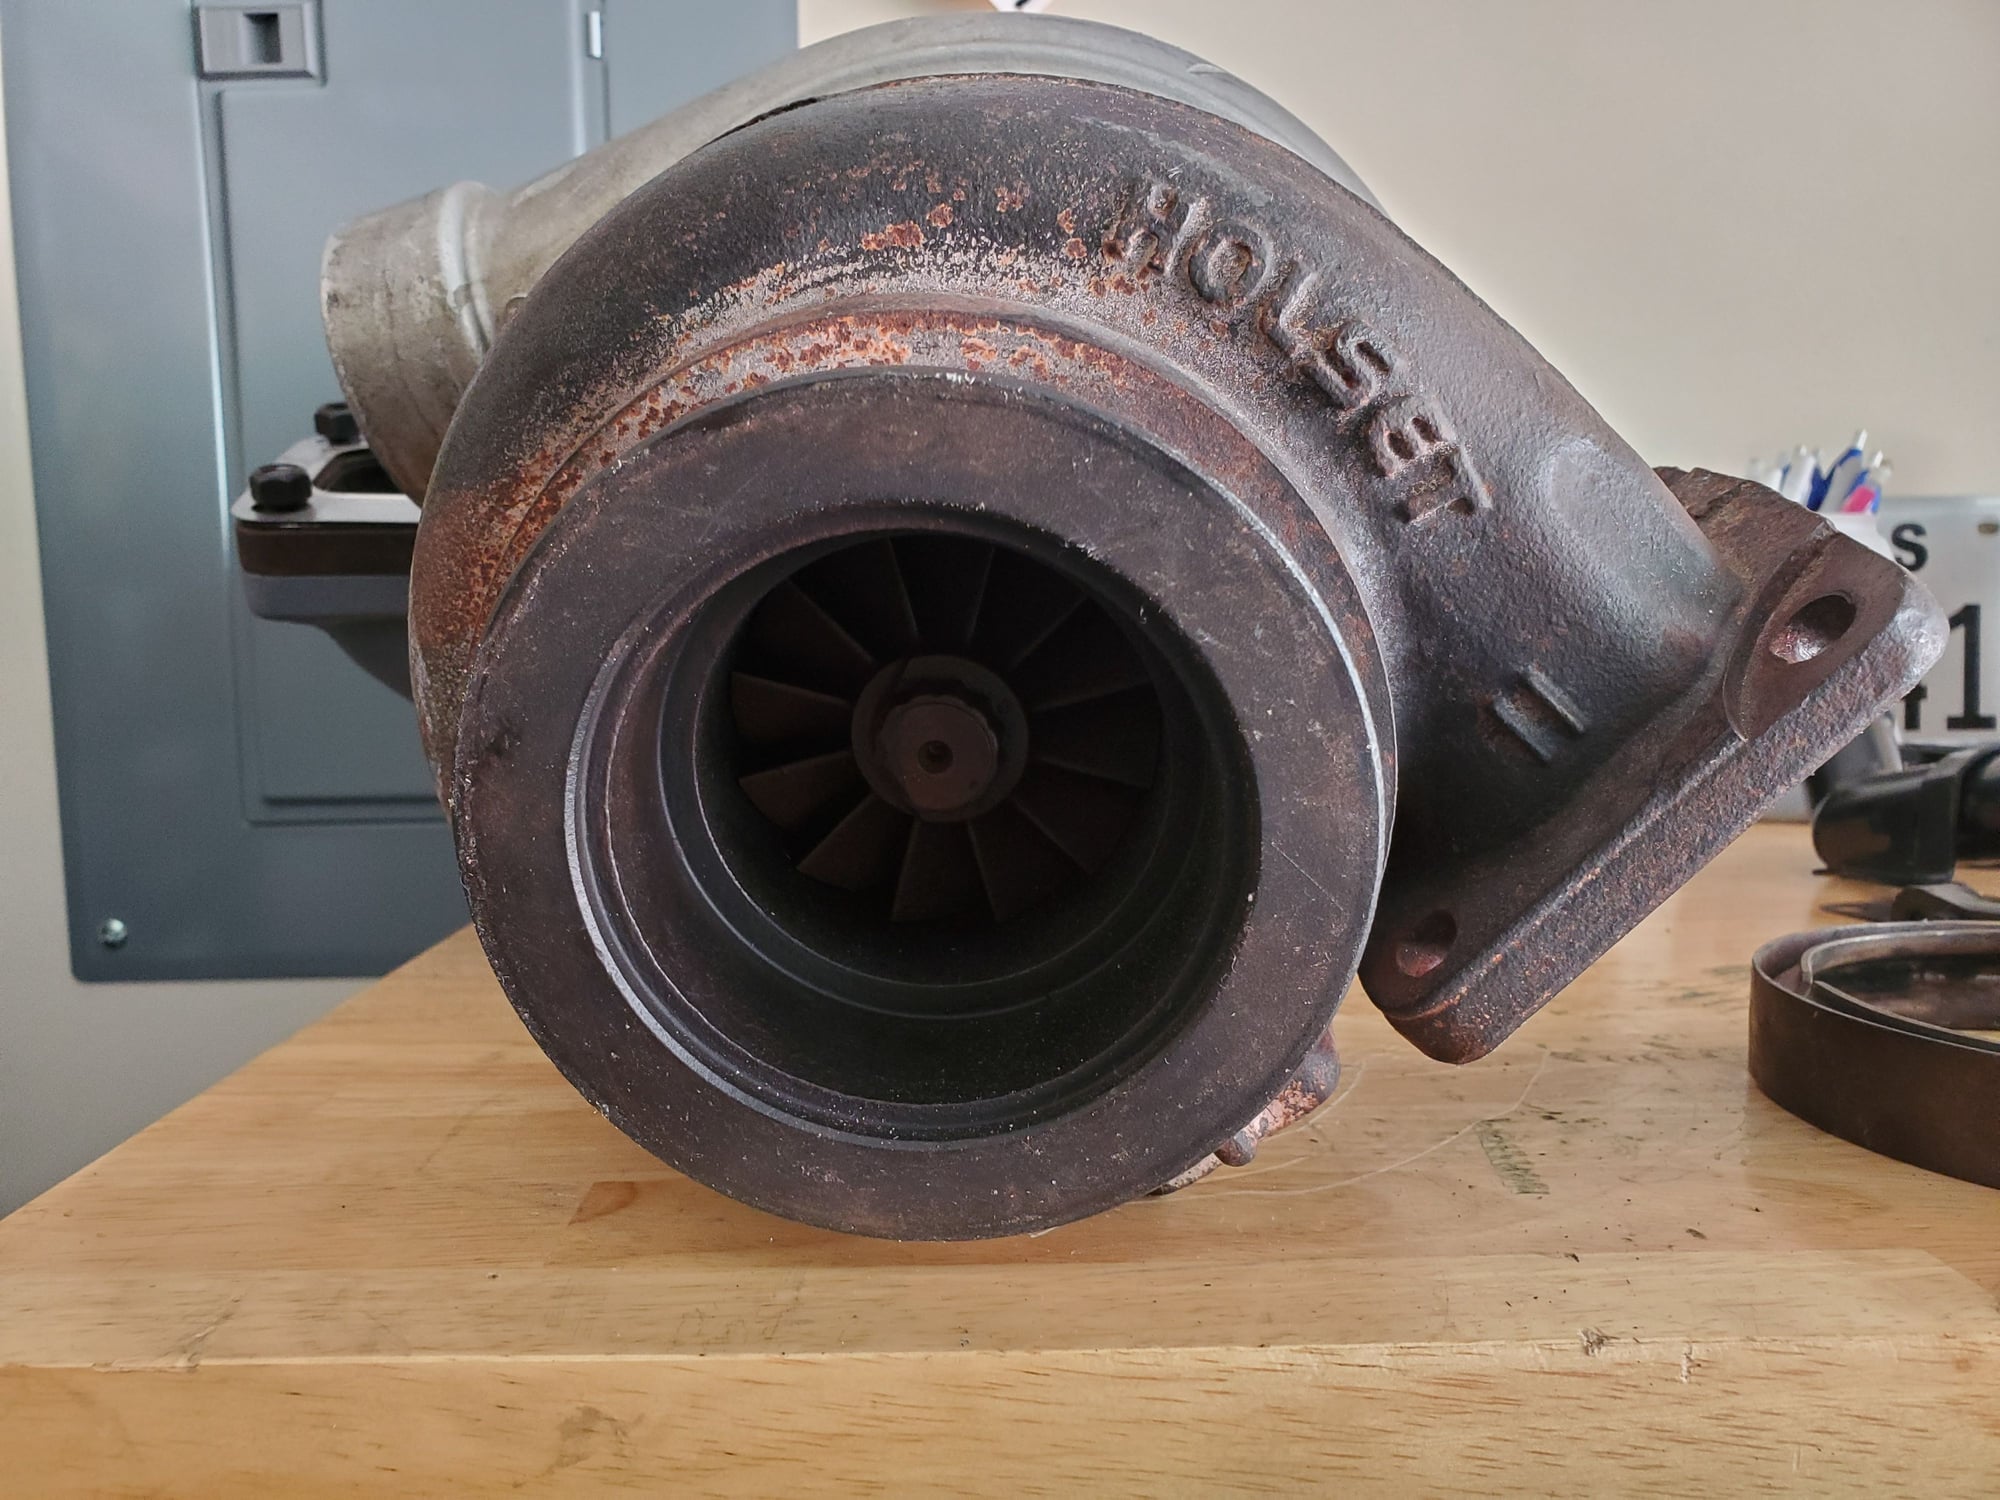 Engine - Power Adders - Holset HX52 - Used - All Years Any Make All Models - Smiths Station, AL 36877, United States